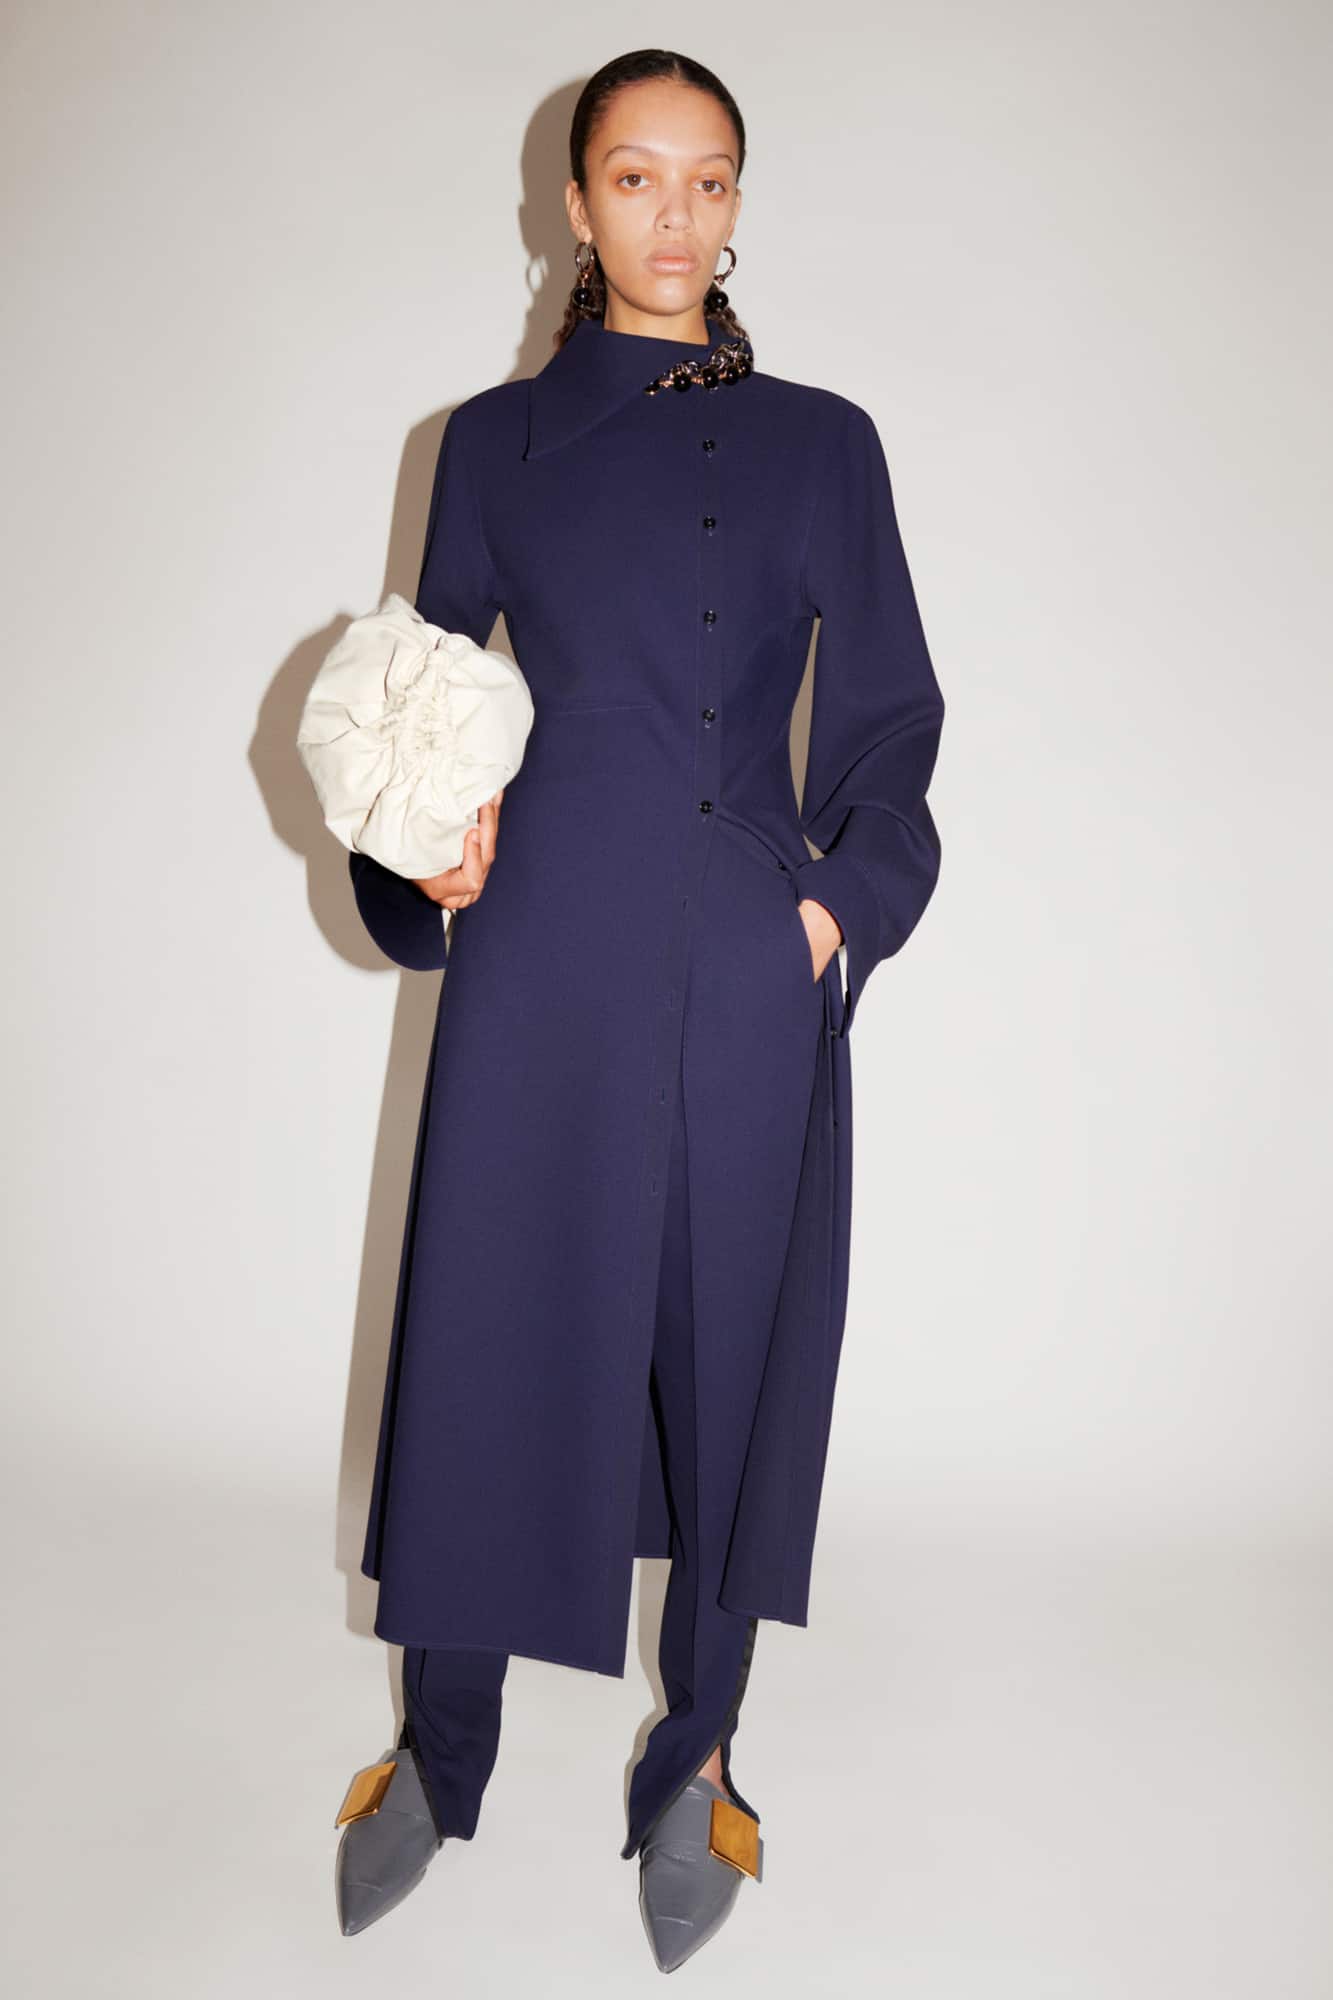 A Collection To Obsess Over: Jil Sander Pre-Fall '21 - Daily Front Row